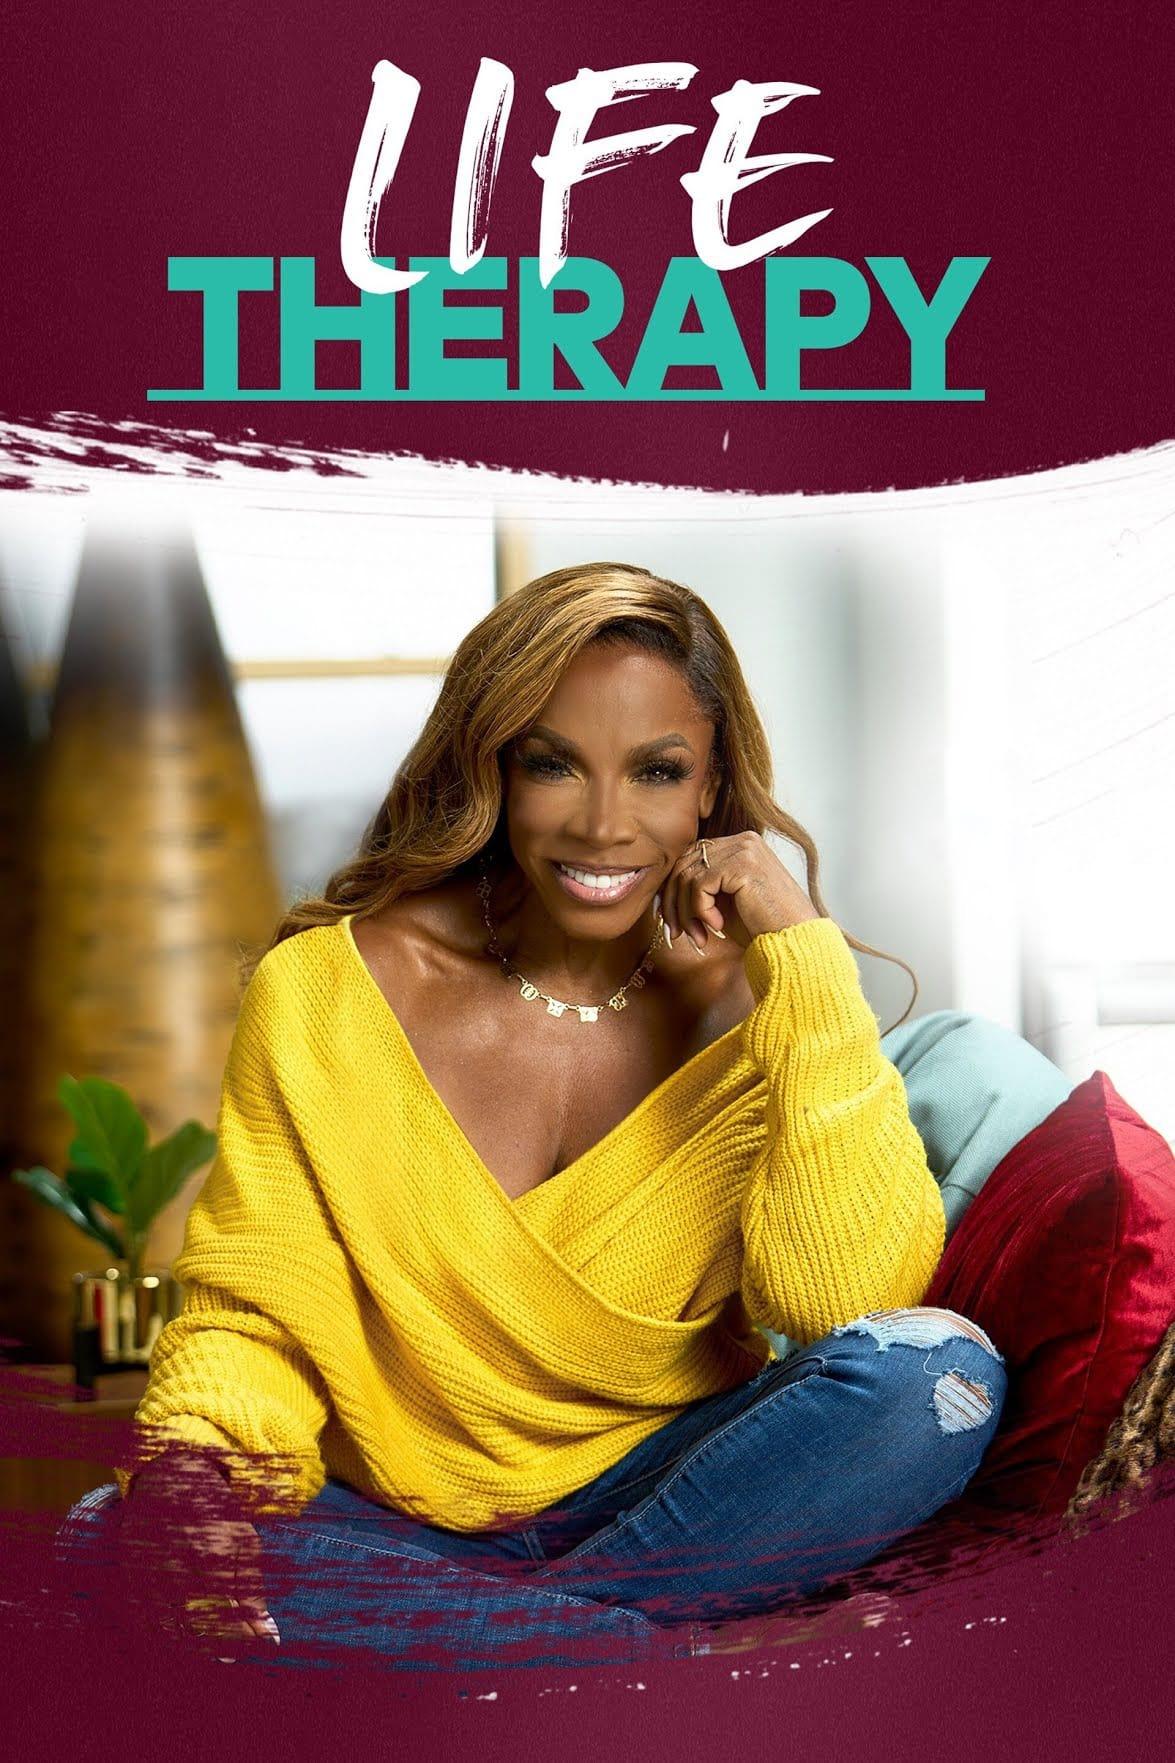 Life Therapy poster